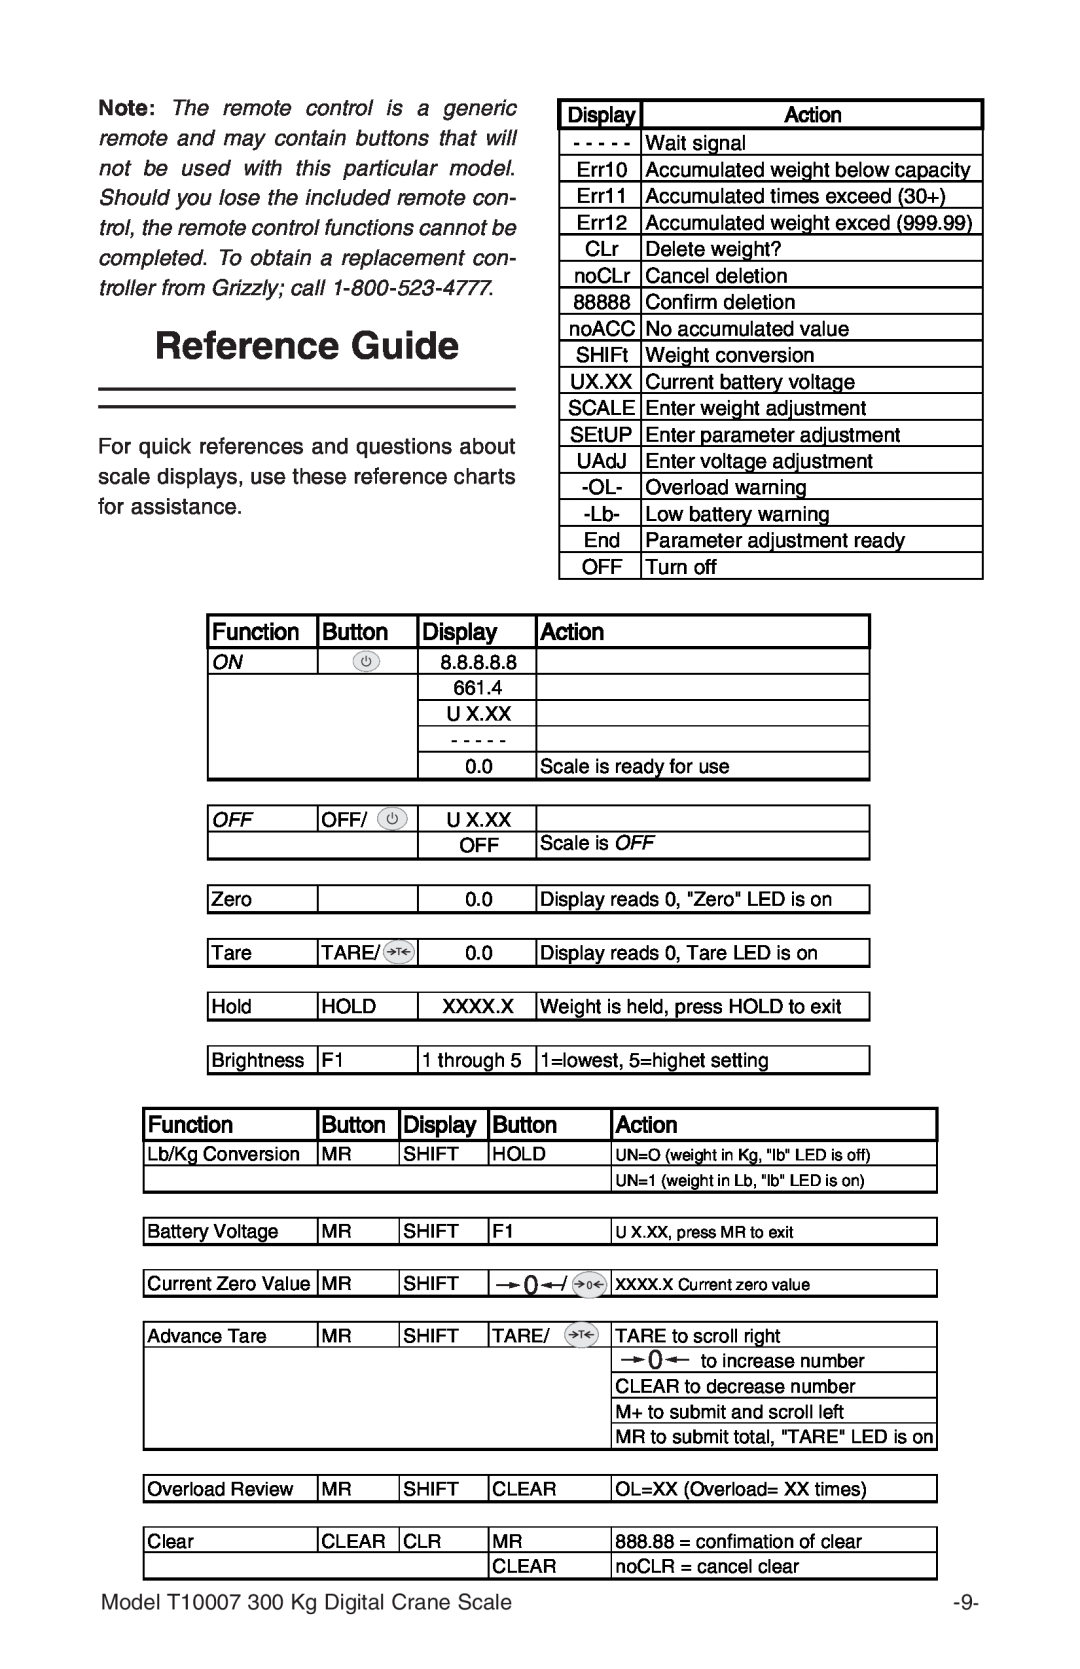 Grizzly T10007 owner manual Reference Guide 